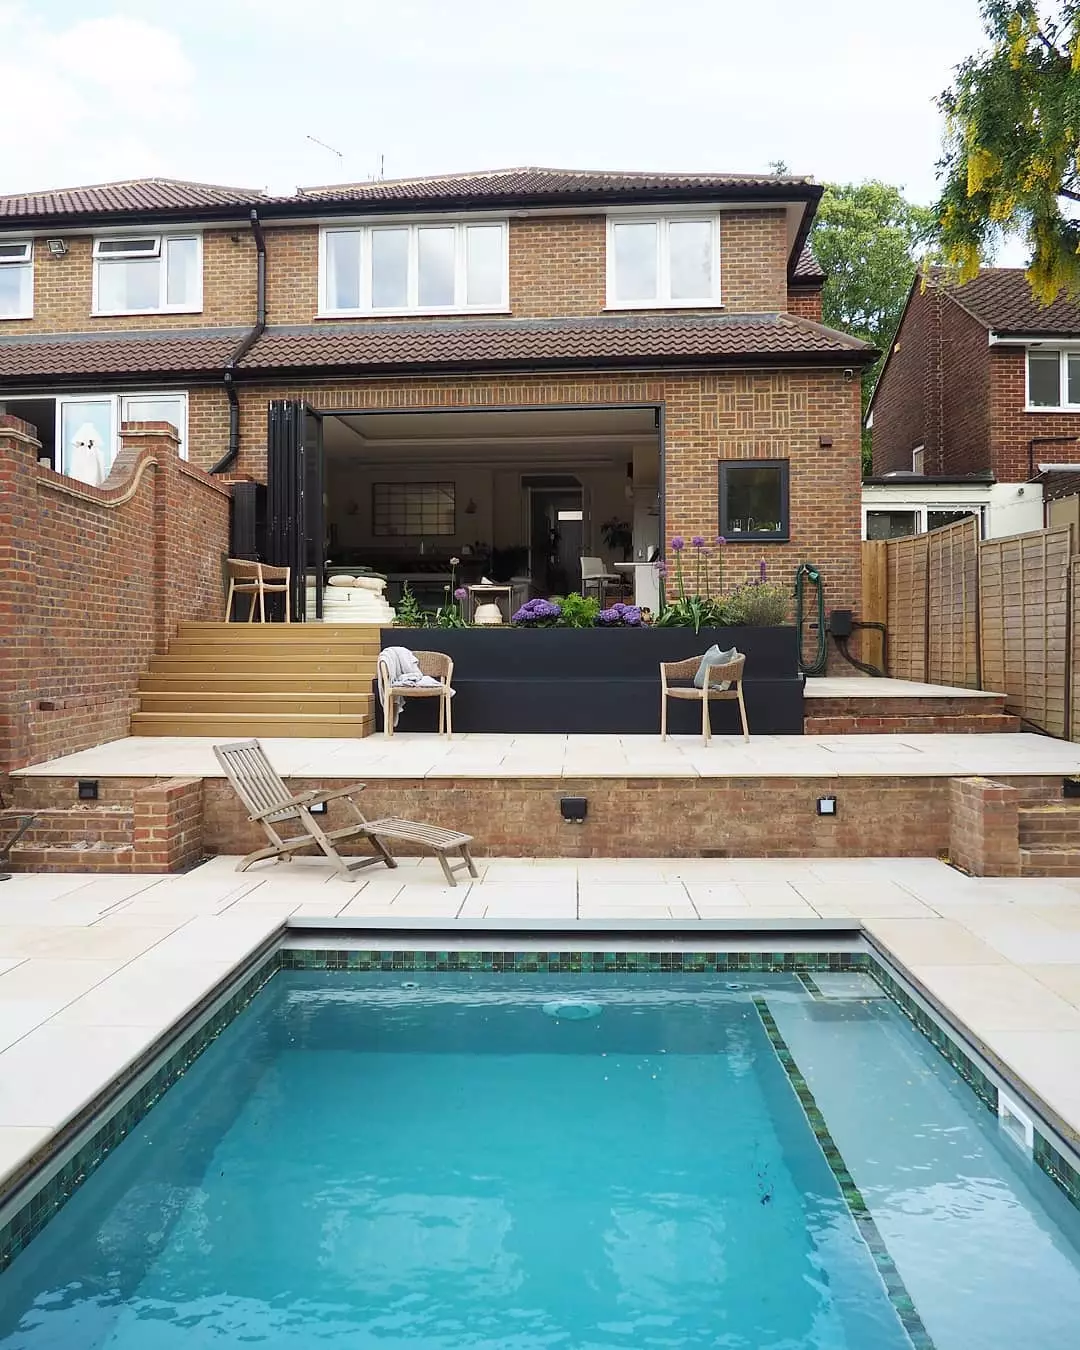 Today it's a plush outside space, pool and two storey extension (